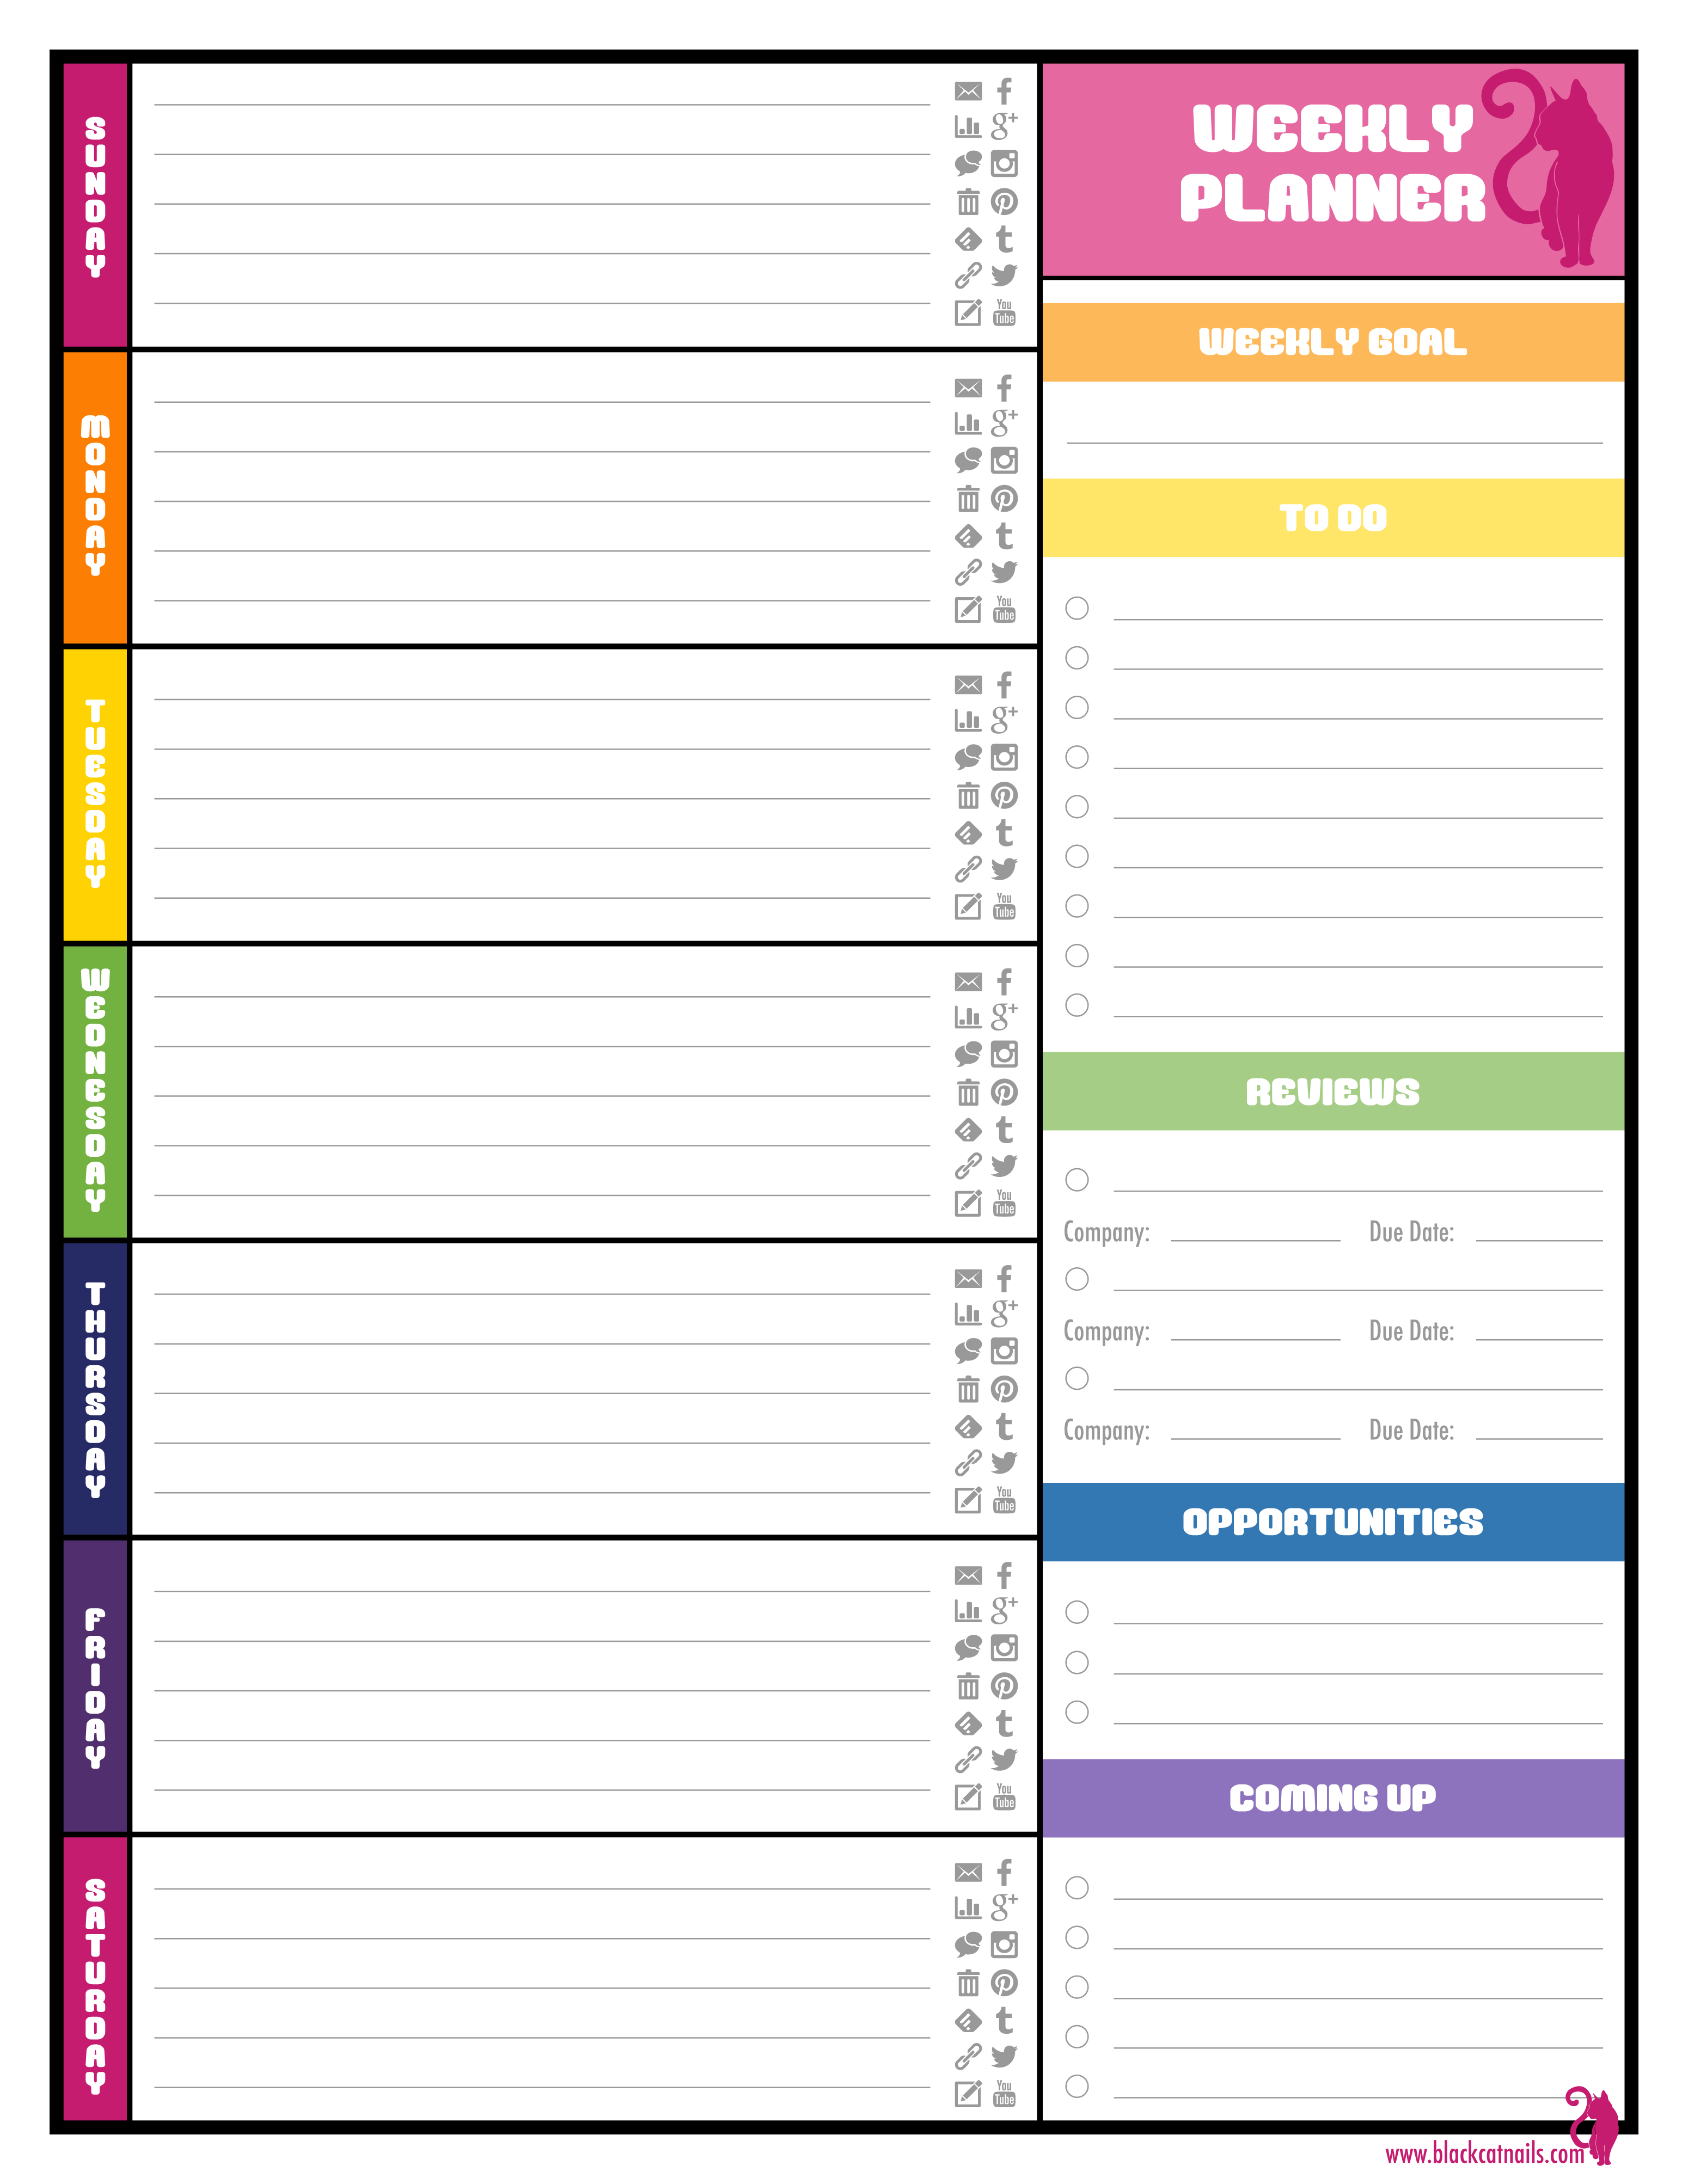 6 Best Images of Printable To Do List Weekly Monthly Planner